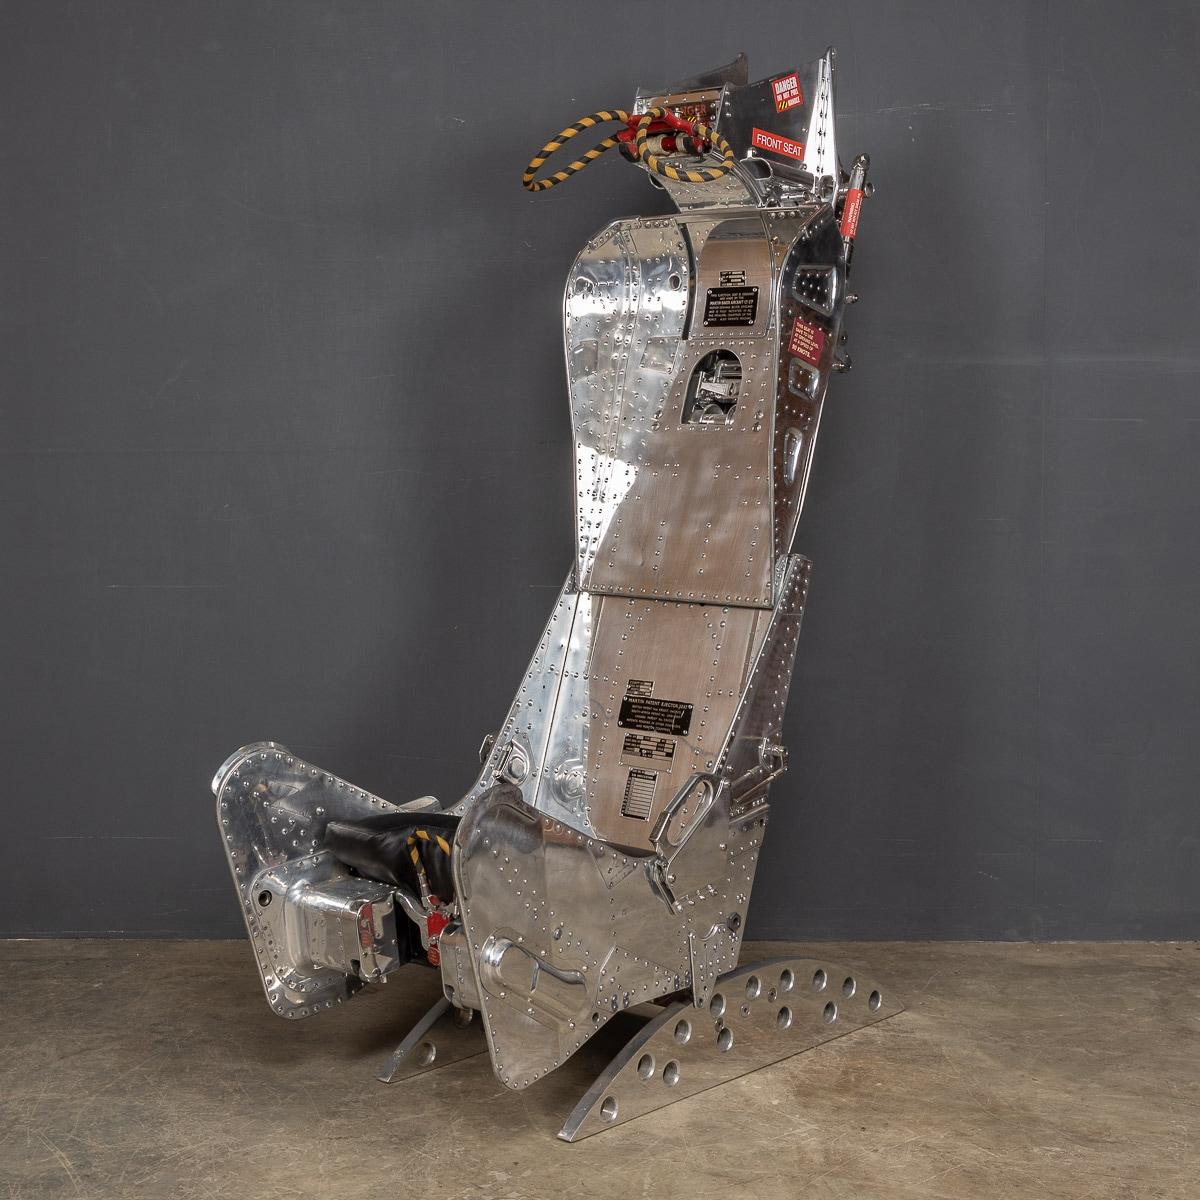 A fantastic 6MSA ejection seat made by Martin Baker, used in the Blackburn Buccaneer S2.

This superbly detailed, highly polished ejection seat with bespoke leather seat is now a fully functional chair, with a fully working electric raising seat